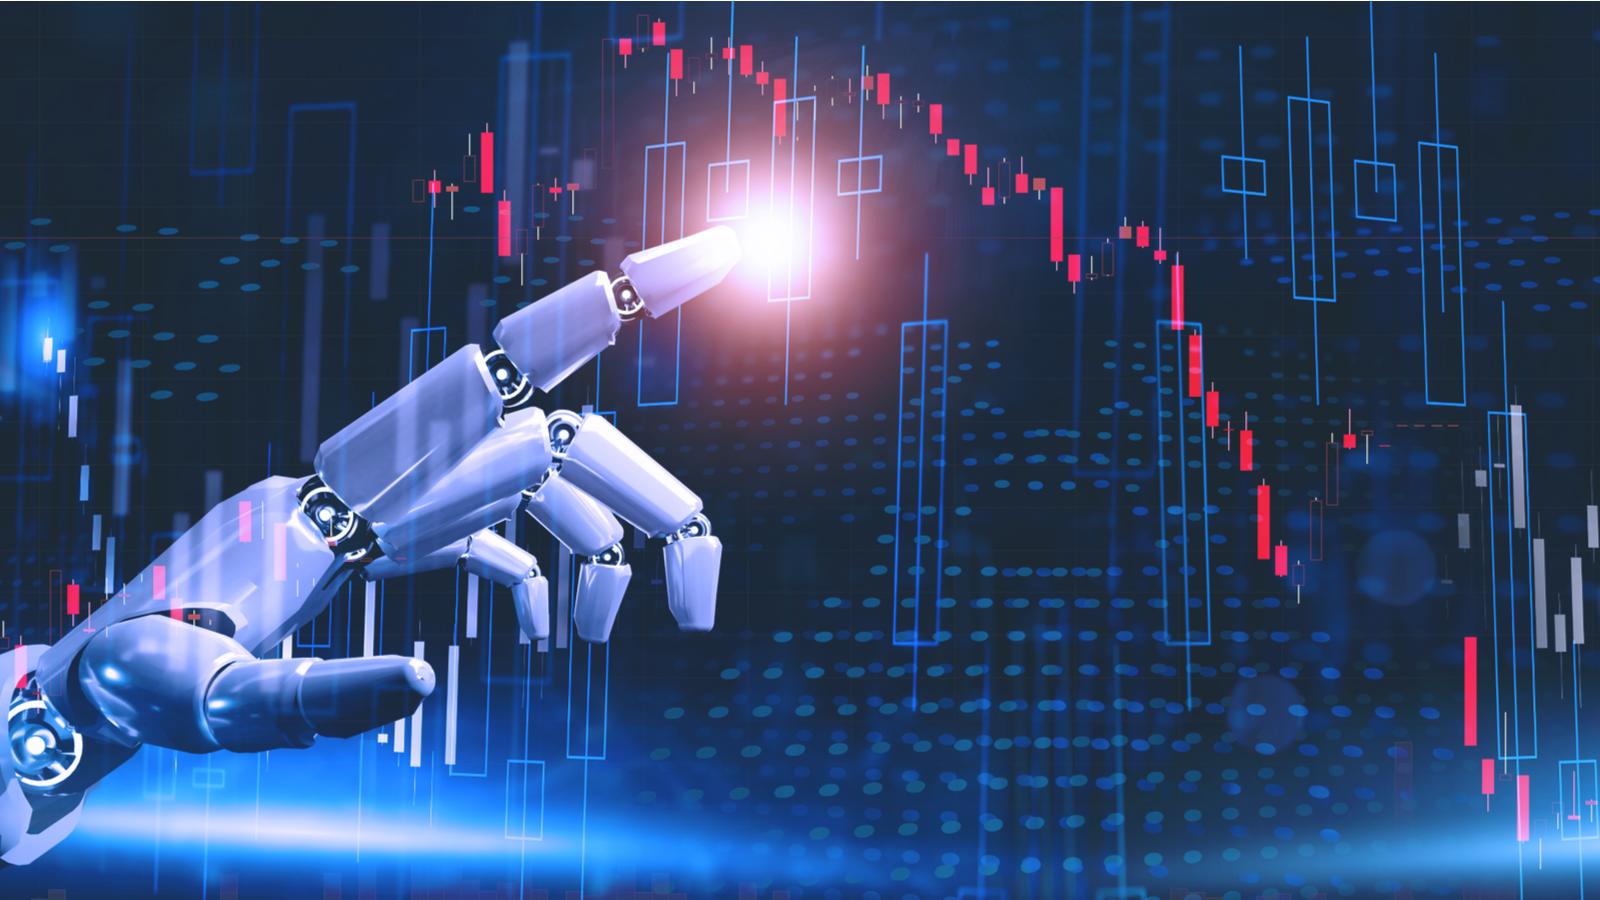 7 Robotic Stocks to Buy for the Coming Robot Boom